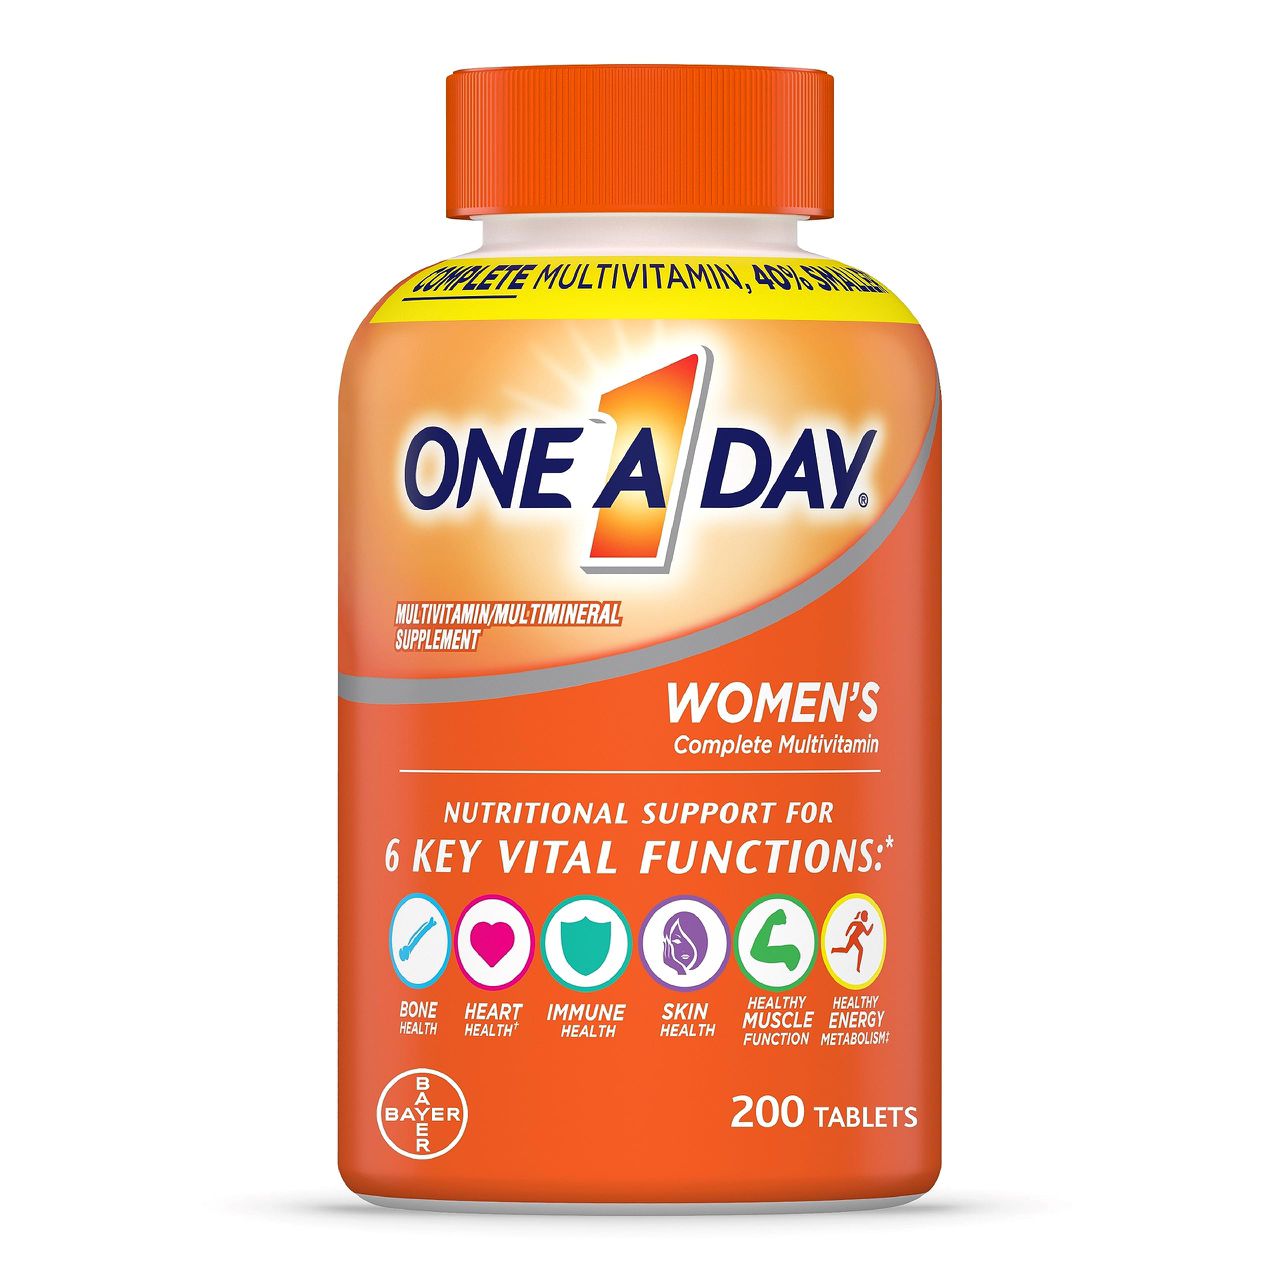 Women's Multivitamin Supplement, 350g, One A Day, 300n Tablets